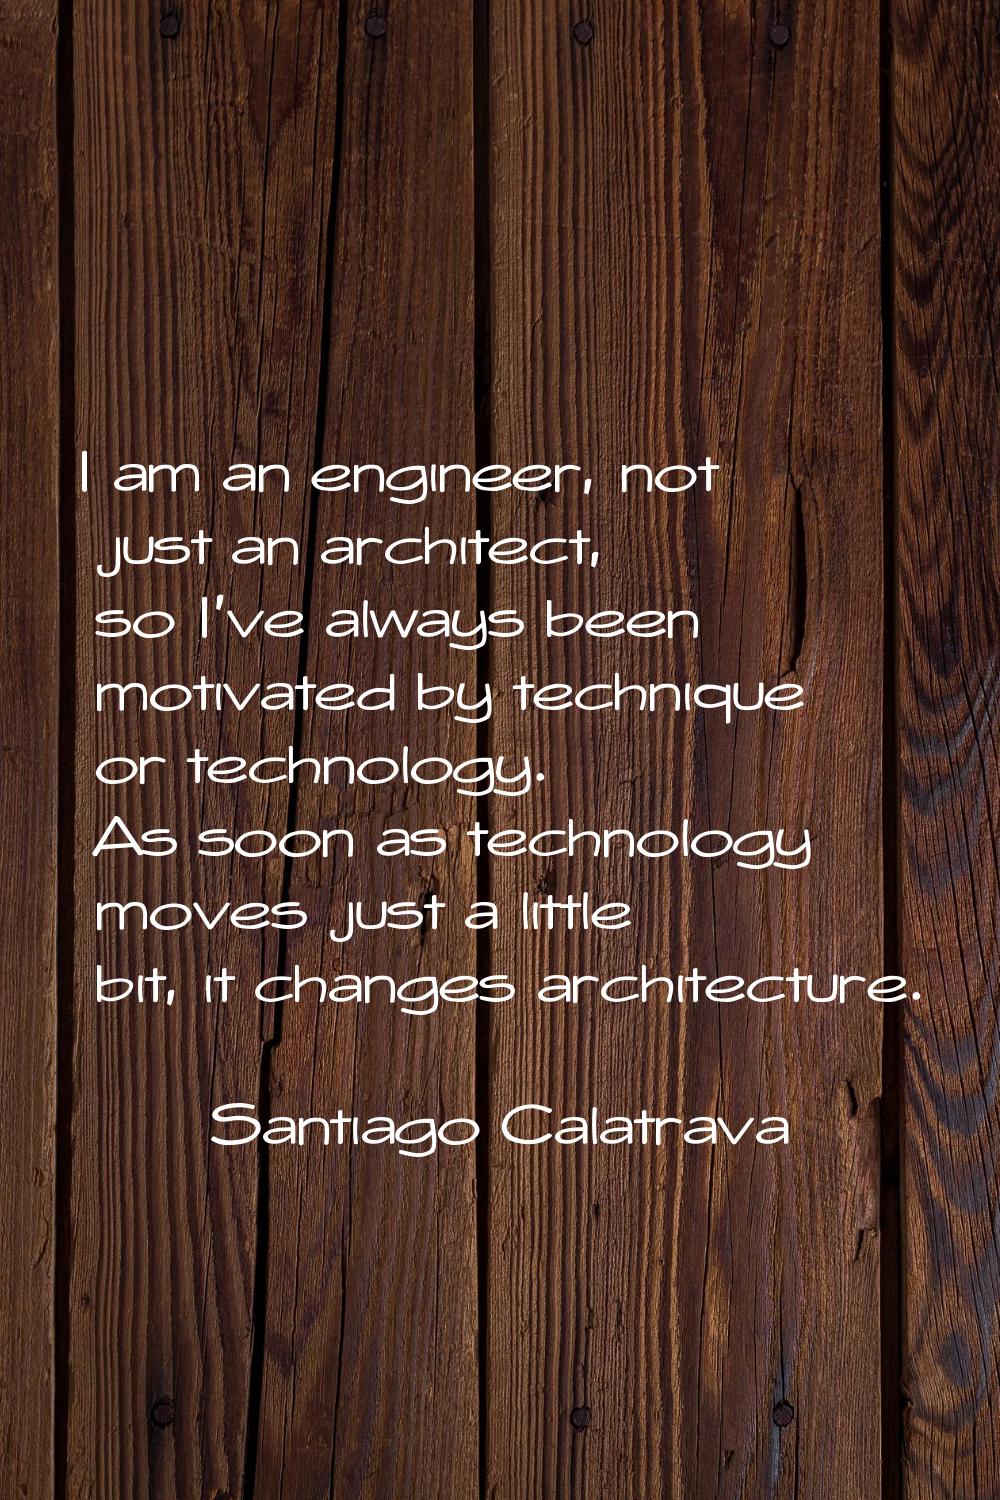 I am an engineer, not just an architect, so I've always been motivated by technique or technology. 